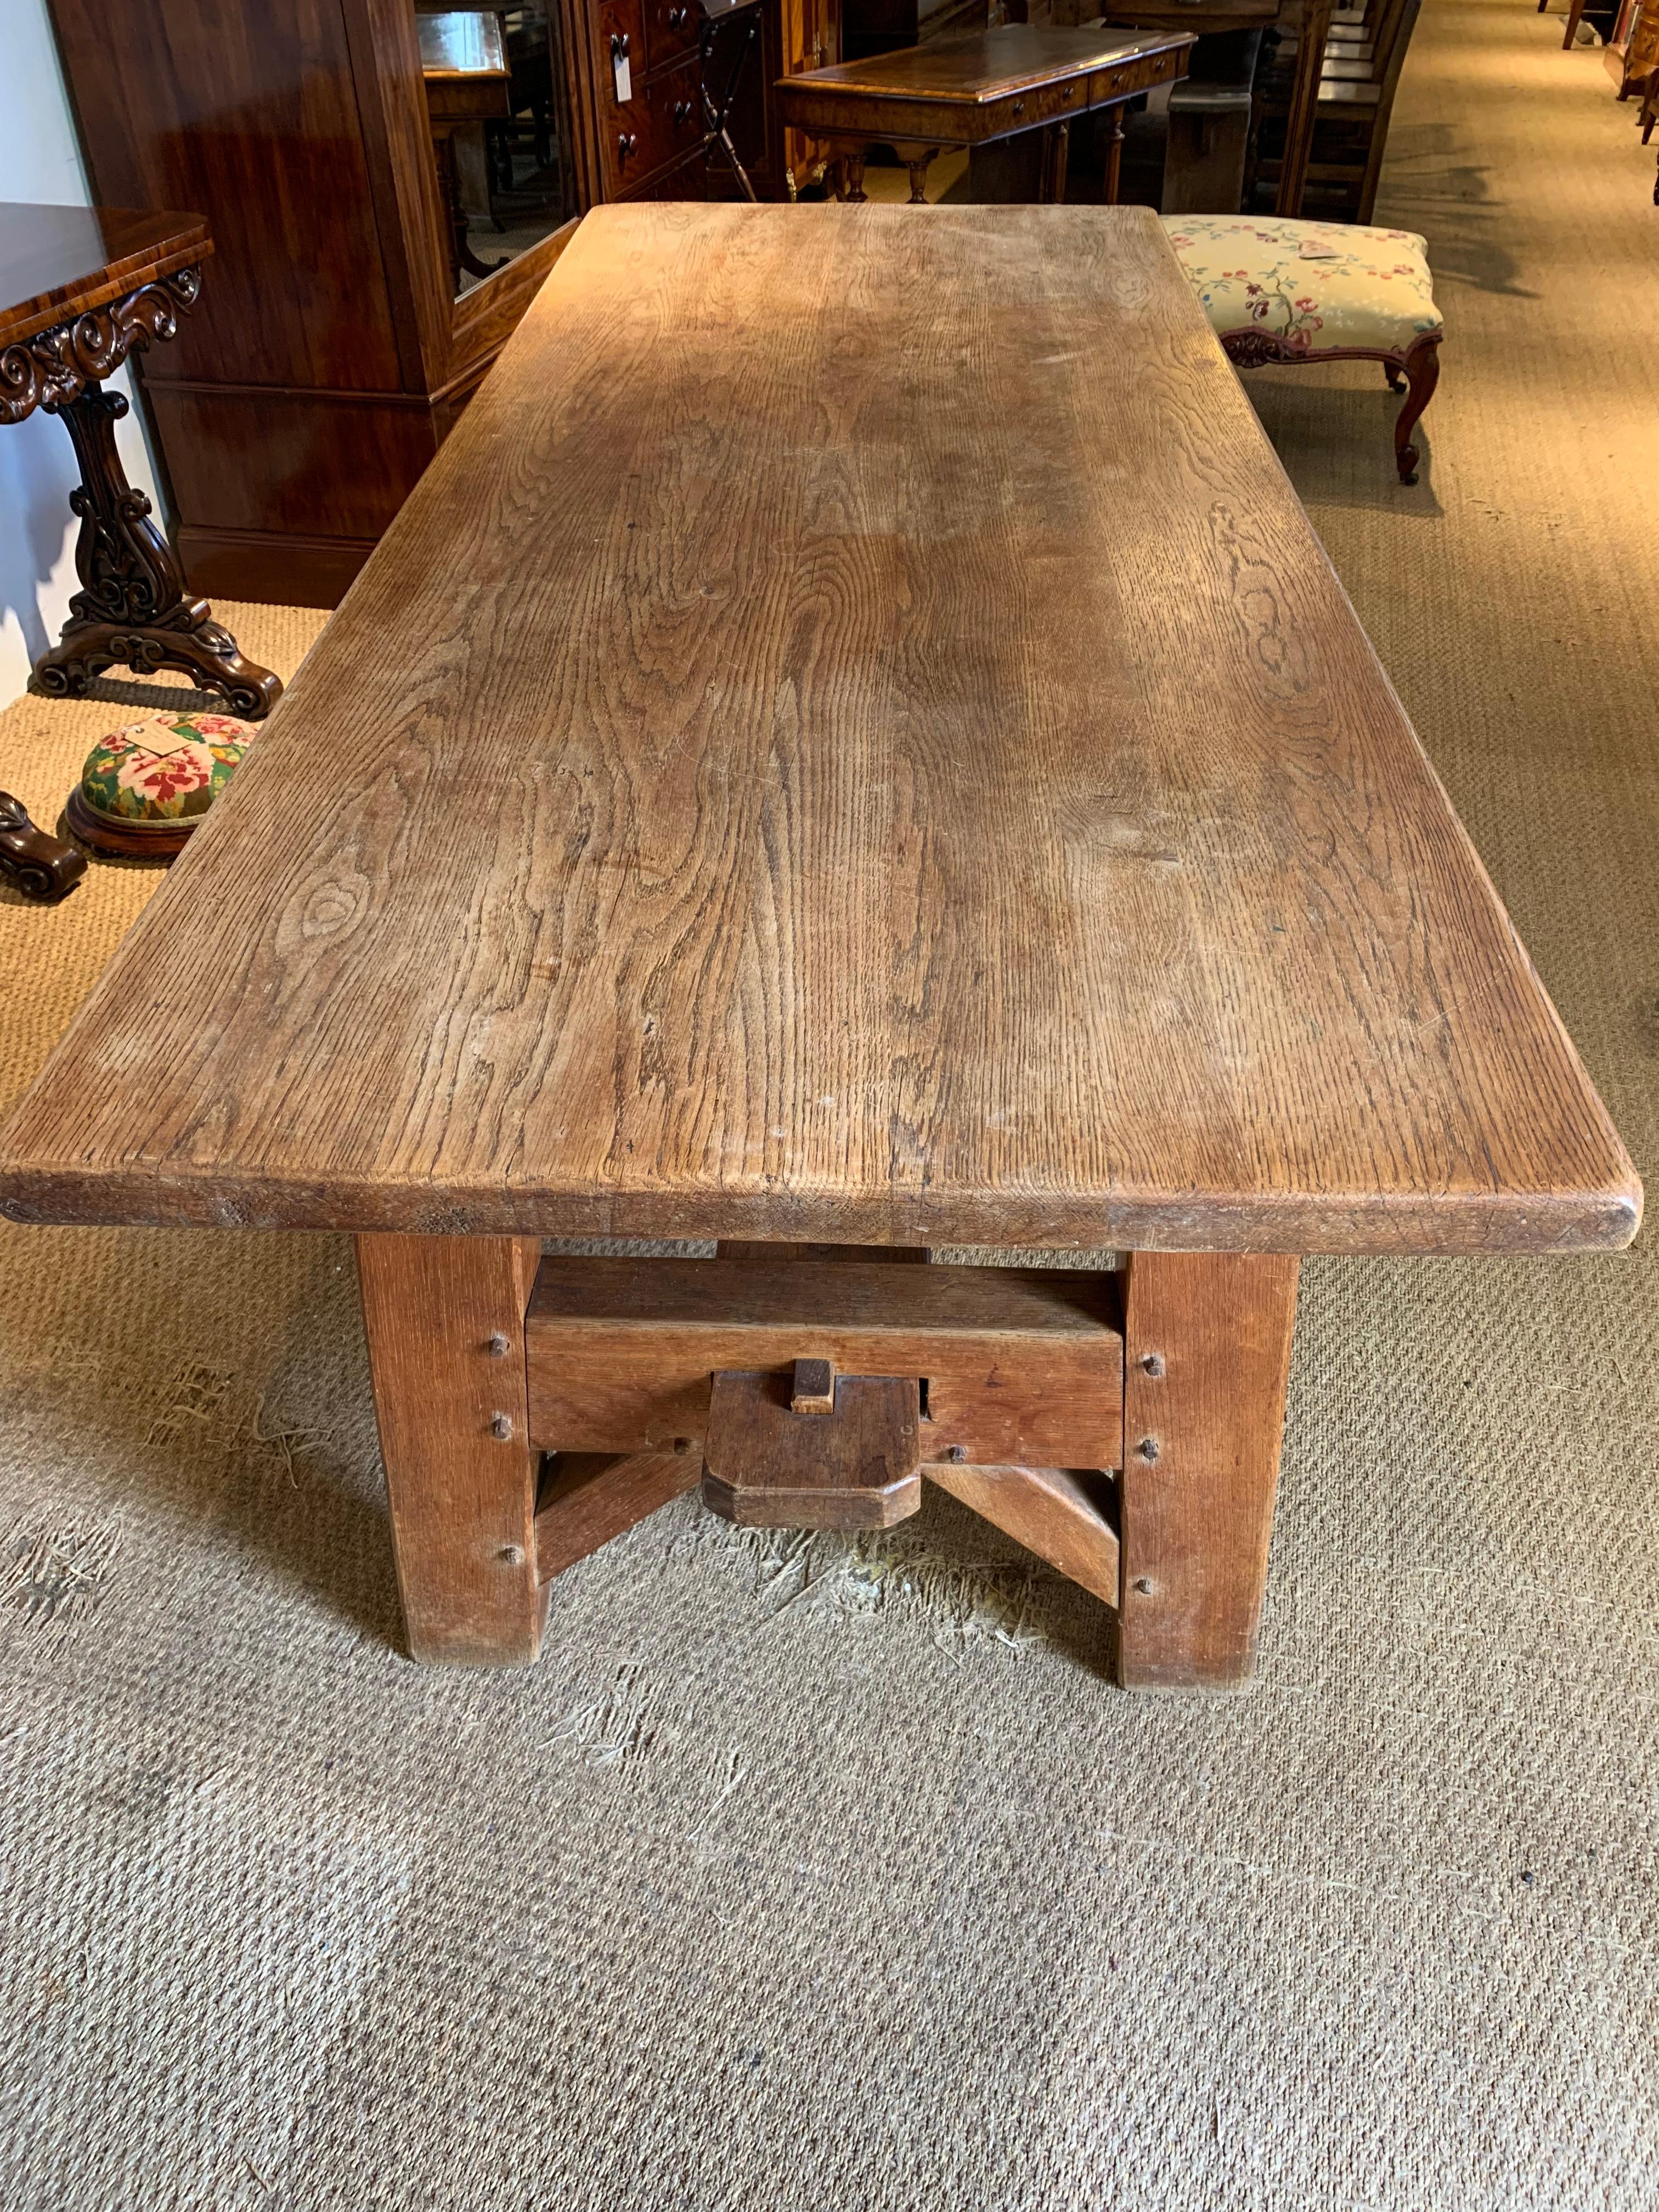 Fabulous industrial style Refectory table, constructed from solid oak, dating from circa 1890s this table will easily seat 8 people, bags of legroom as 29 inches under the top ( no rail on this table).

Measures: Height 31 inches 
Width 33 inches